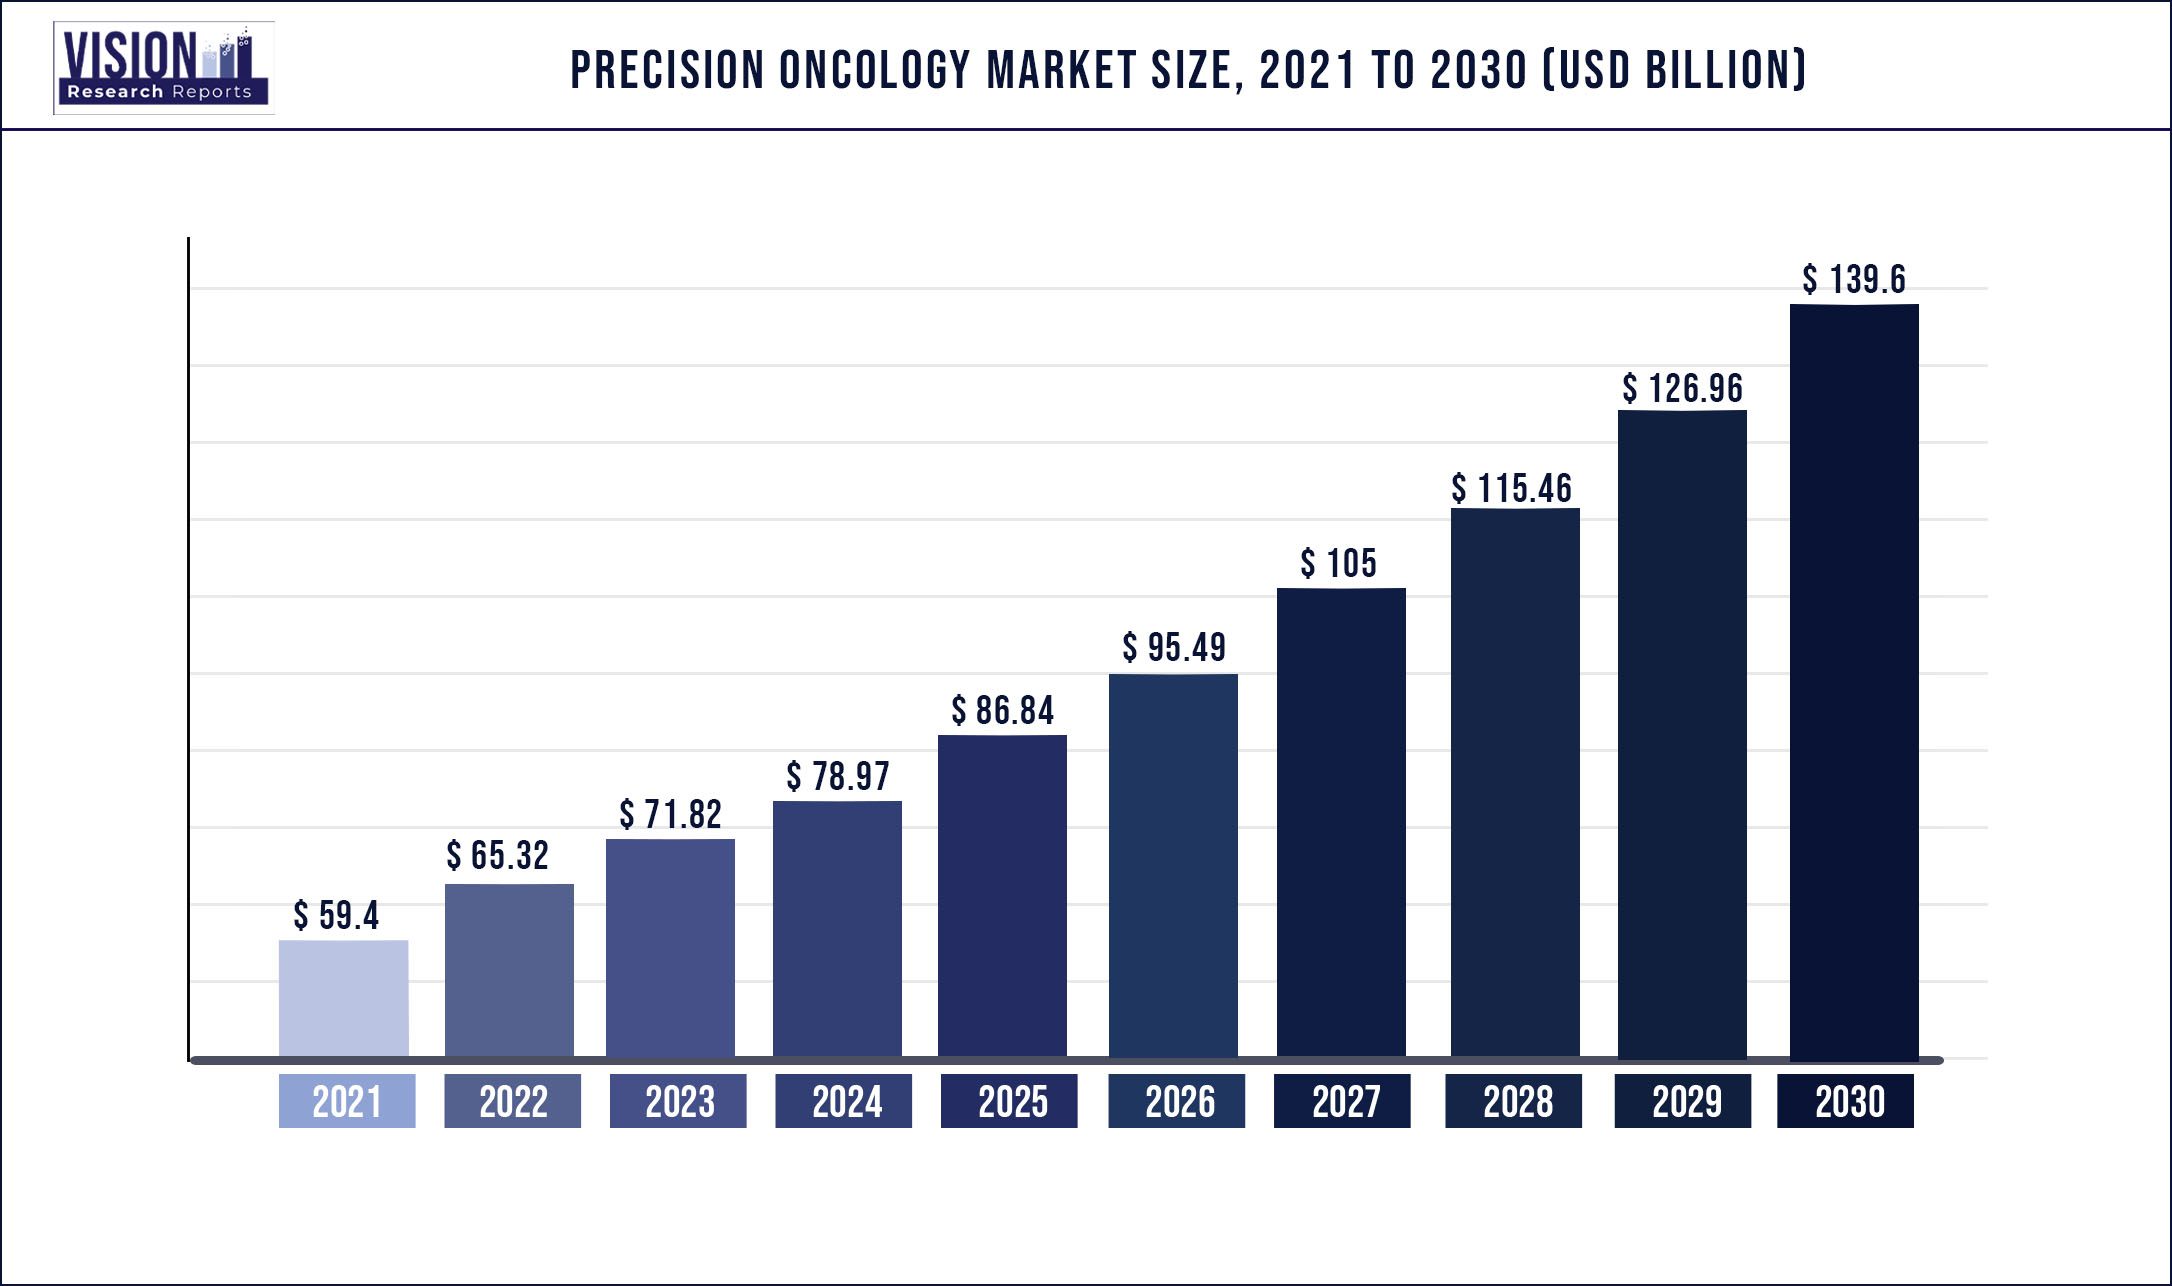 Precision Oncology Market Size 2021 to 2030